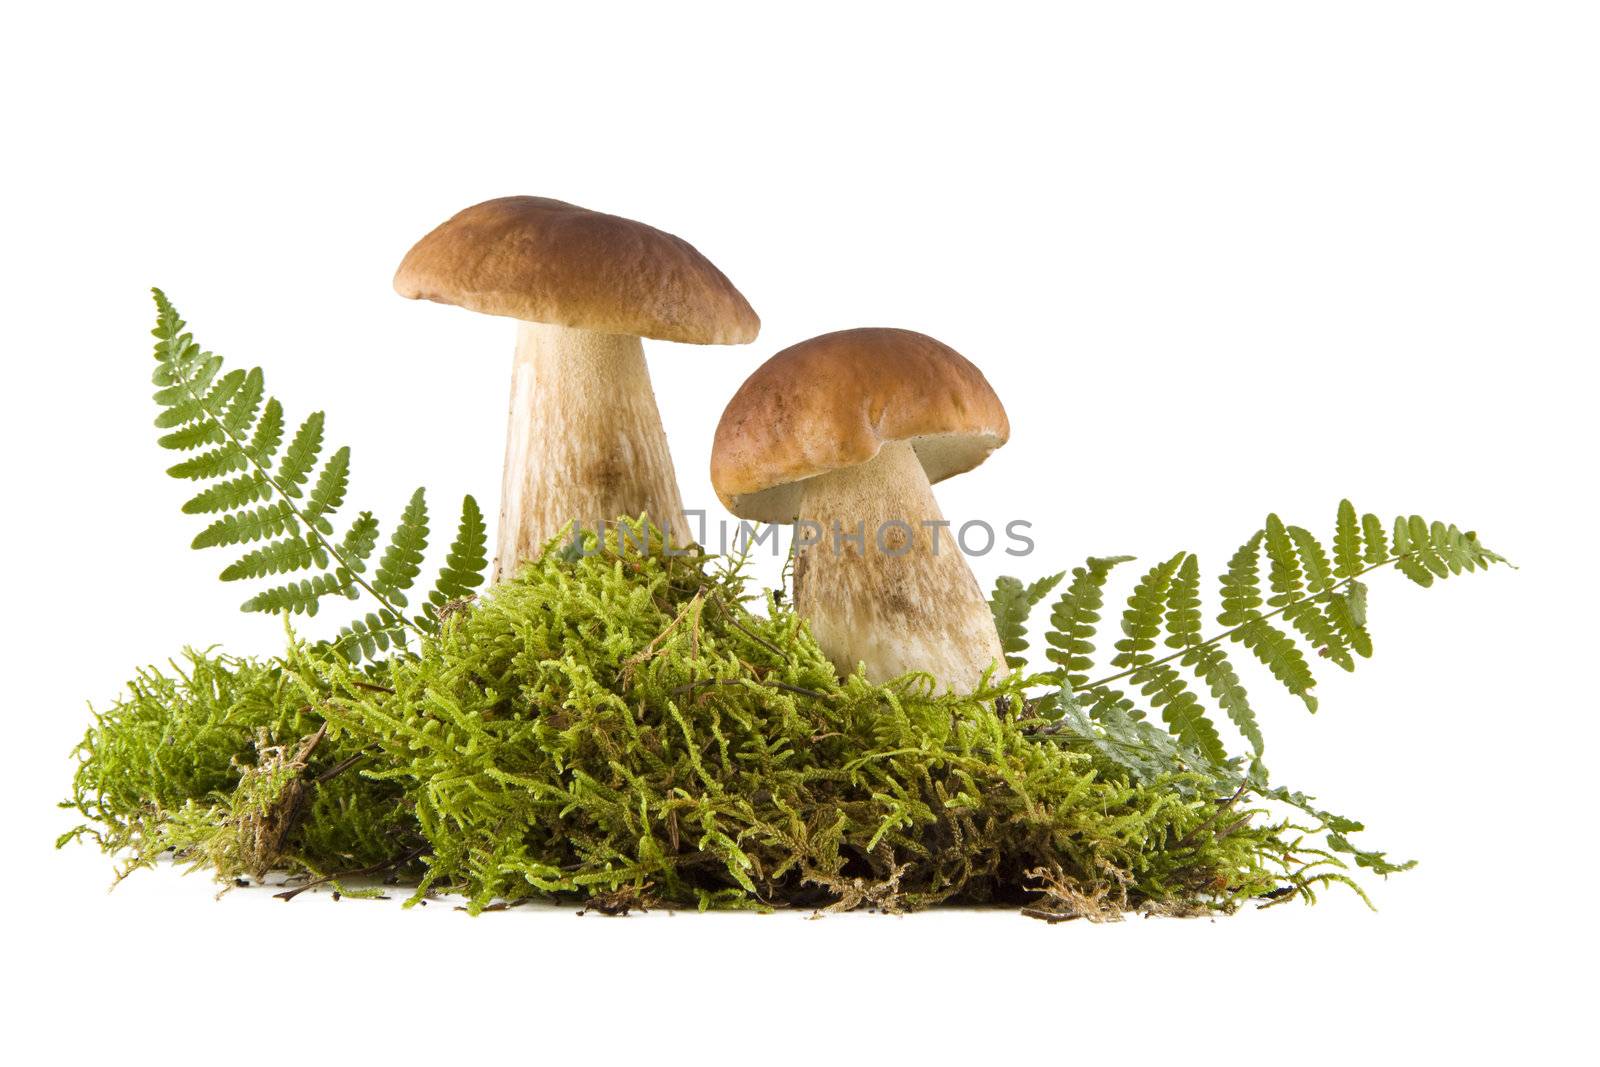 Two fresh porcini mushrooms in a green moss isolated on white